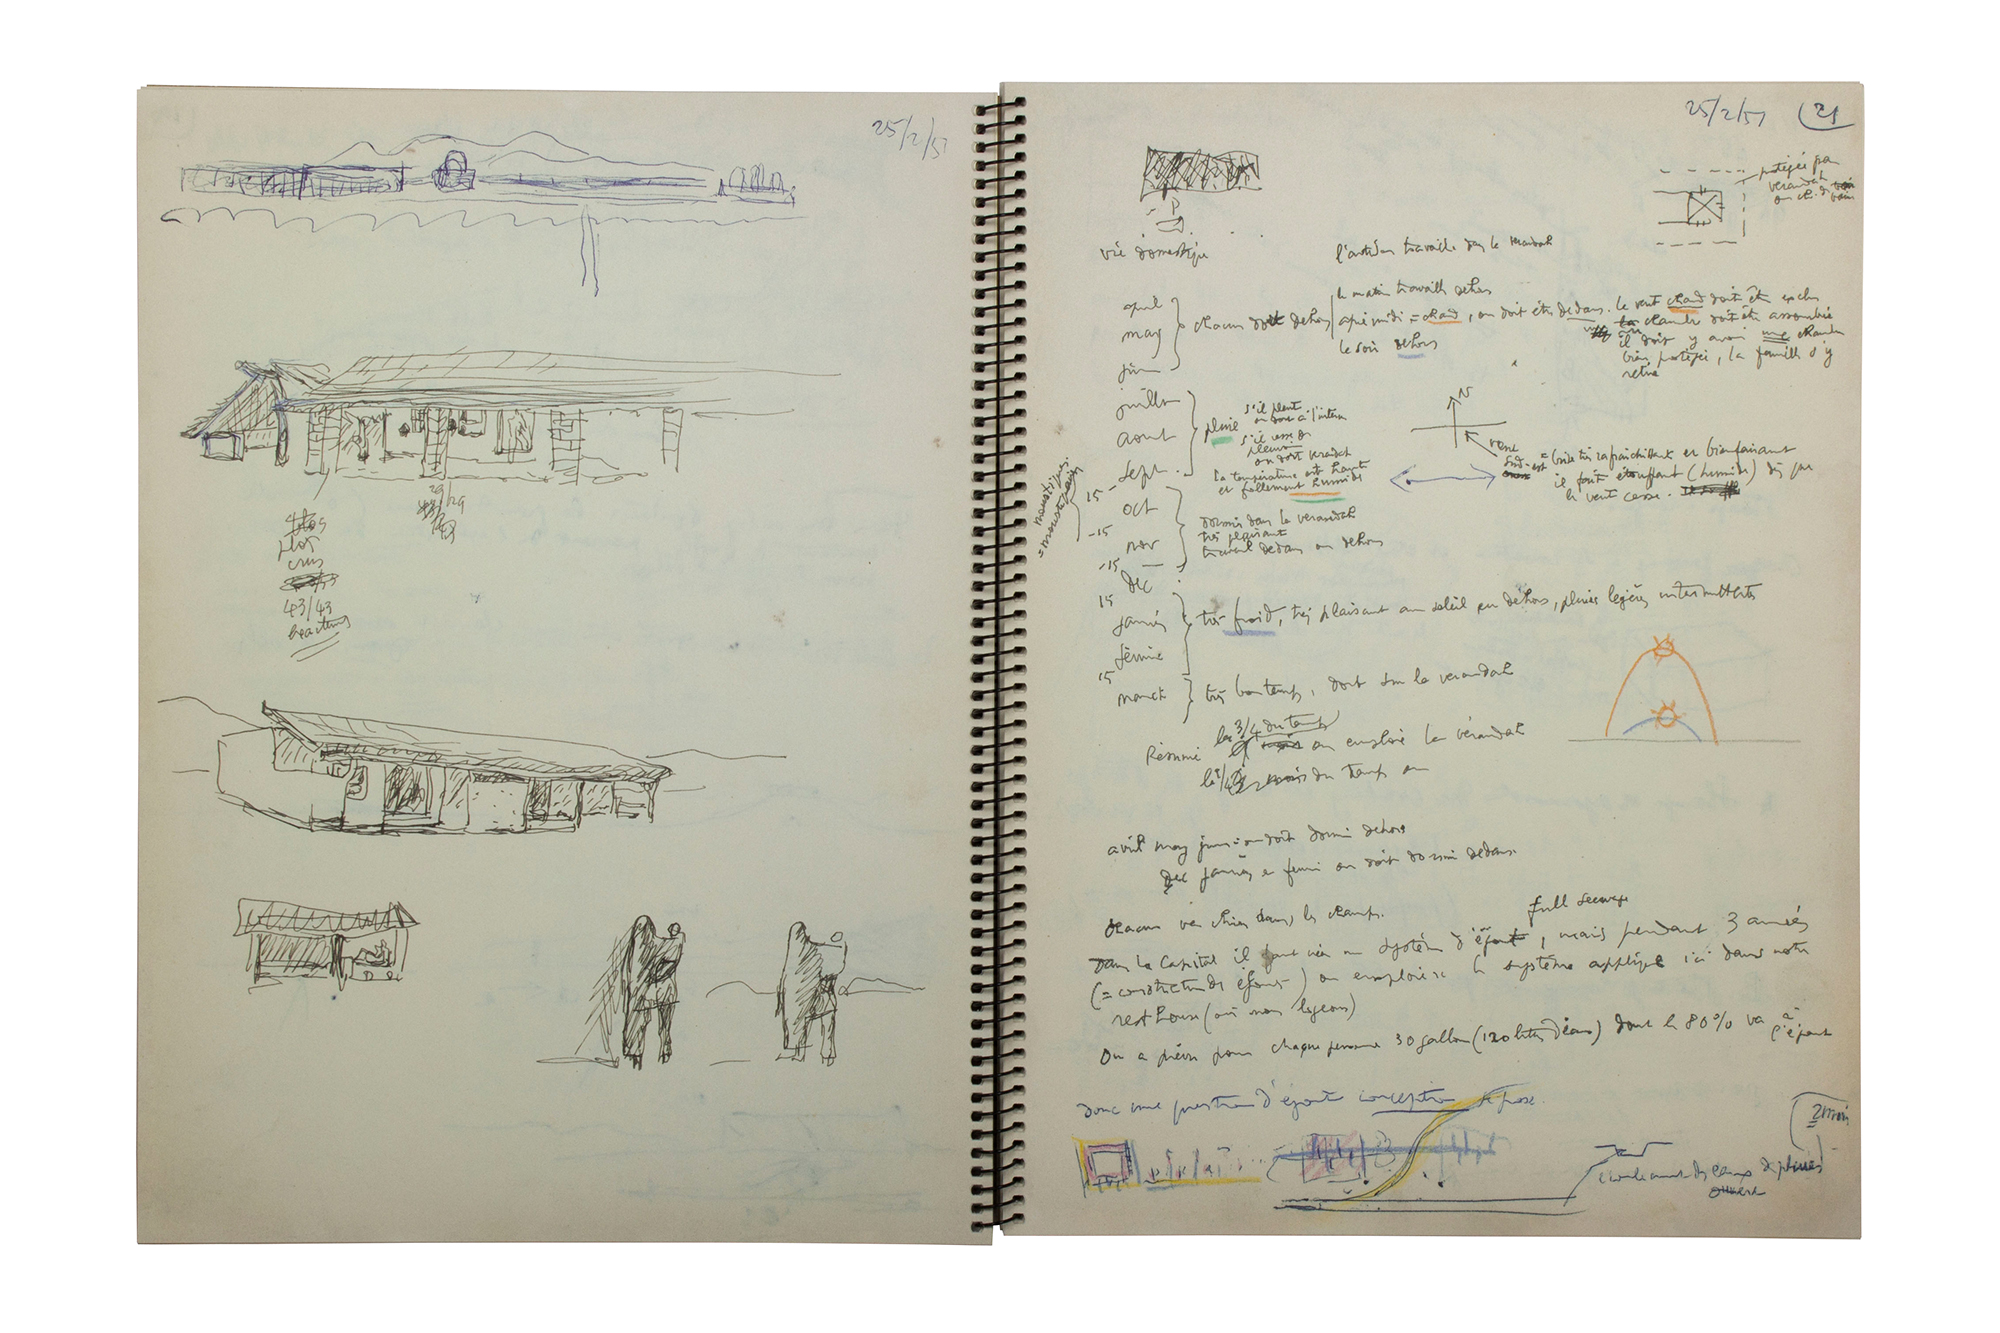 Sketches and annotations made by the Swiss-French architect during the first weeks of this visit to India, from February 21 to April 1.